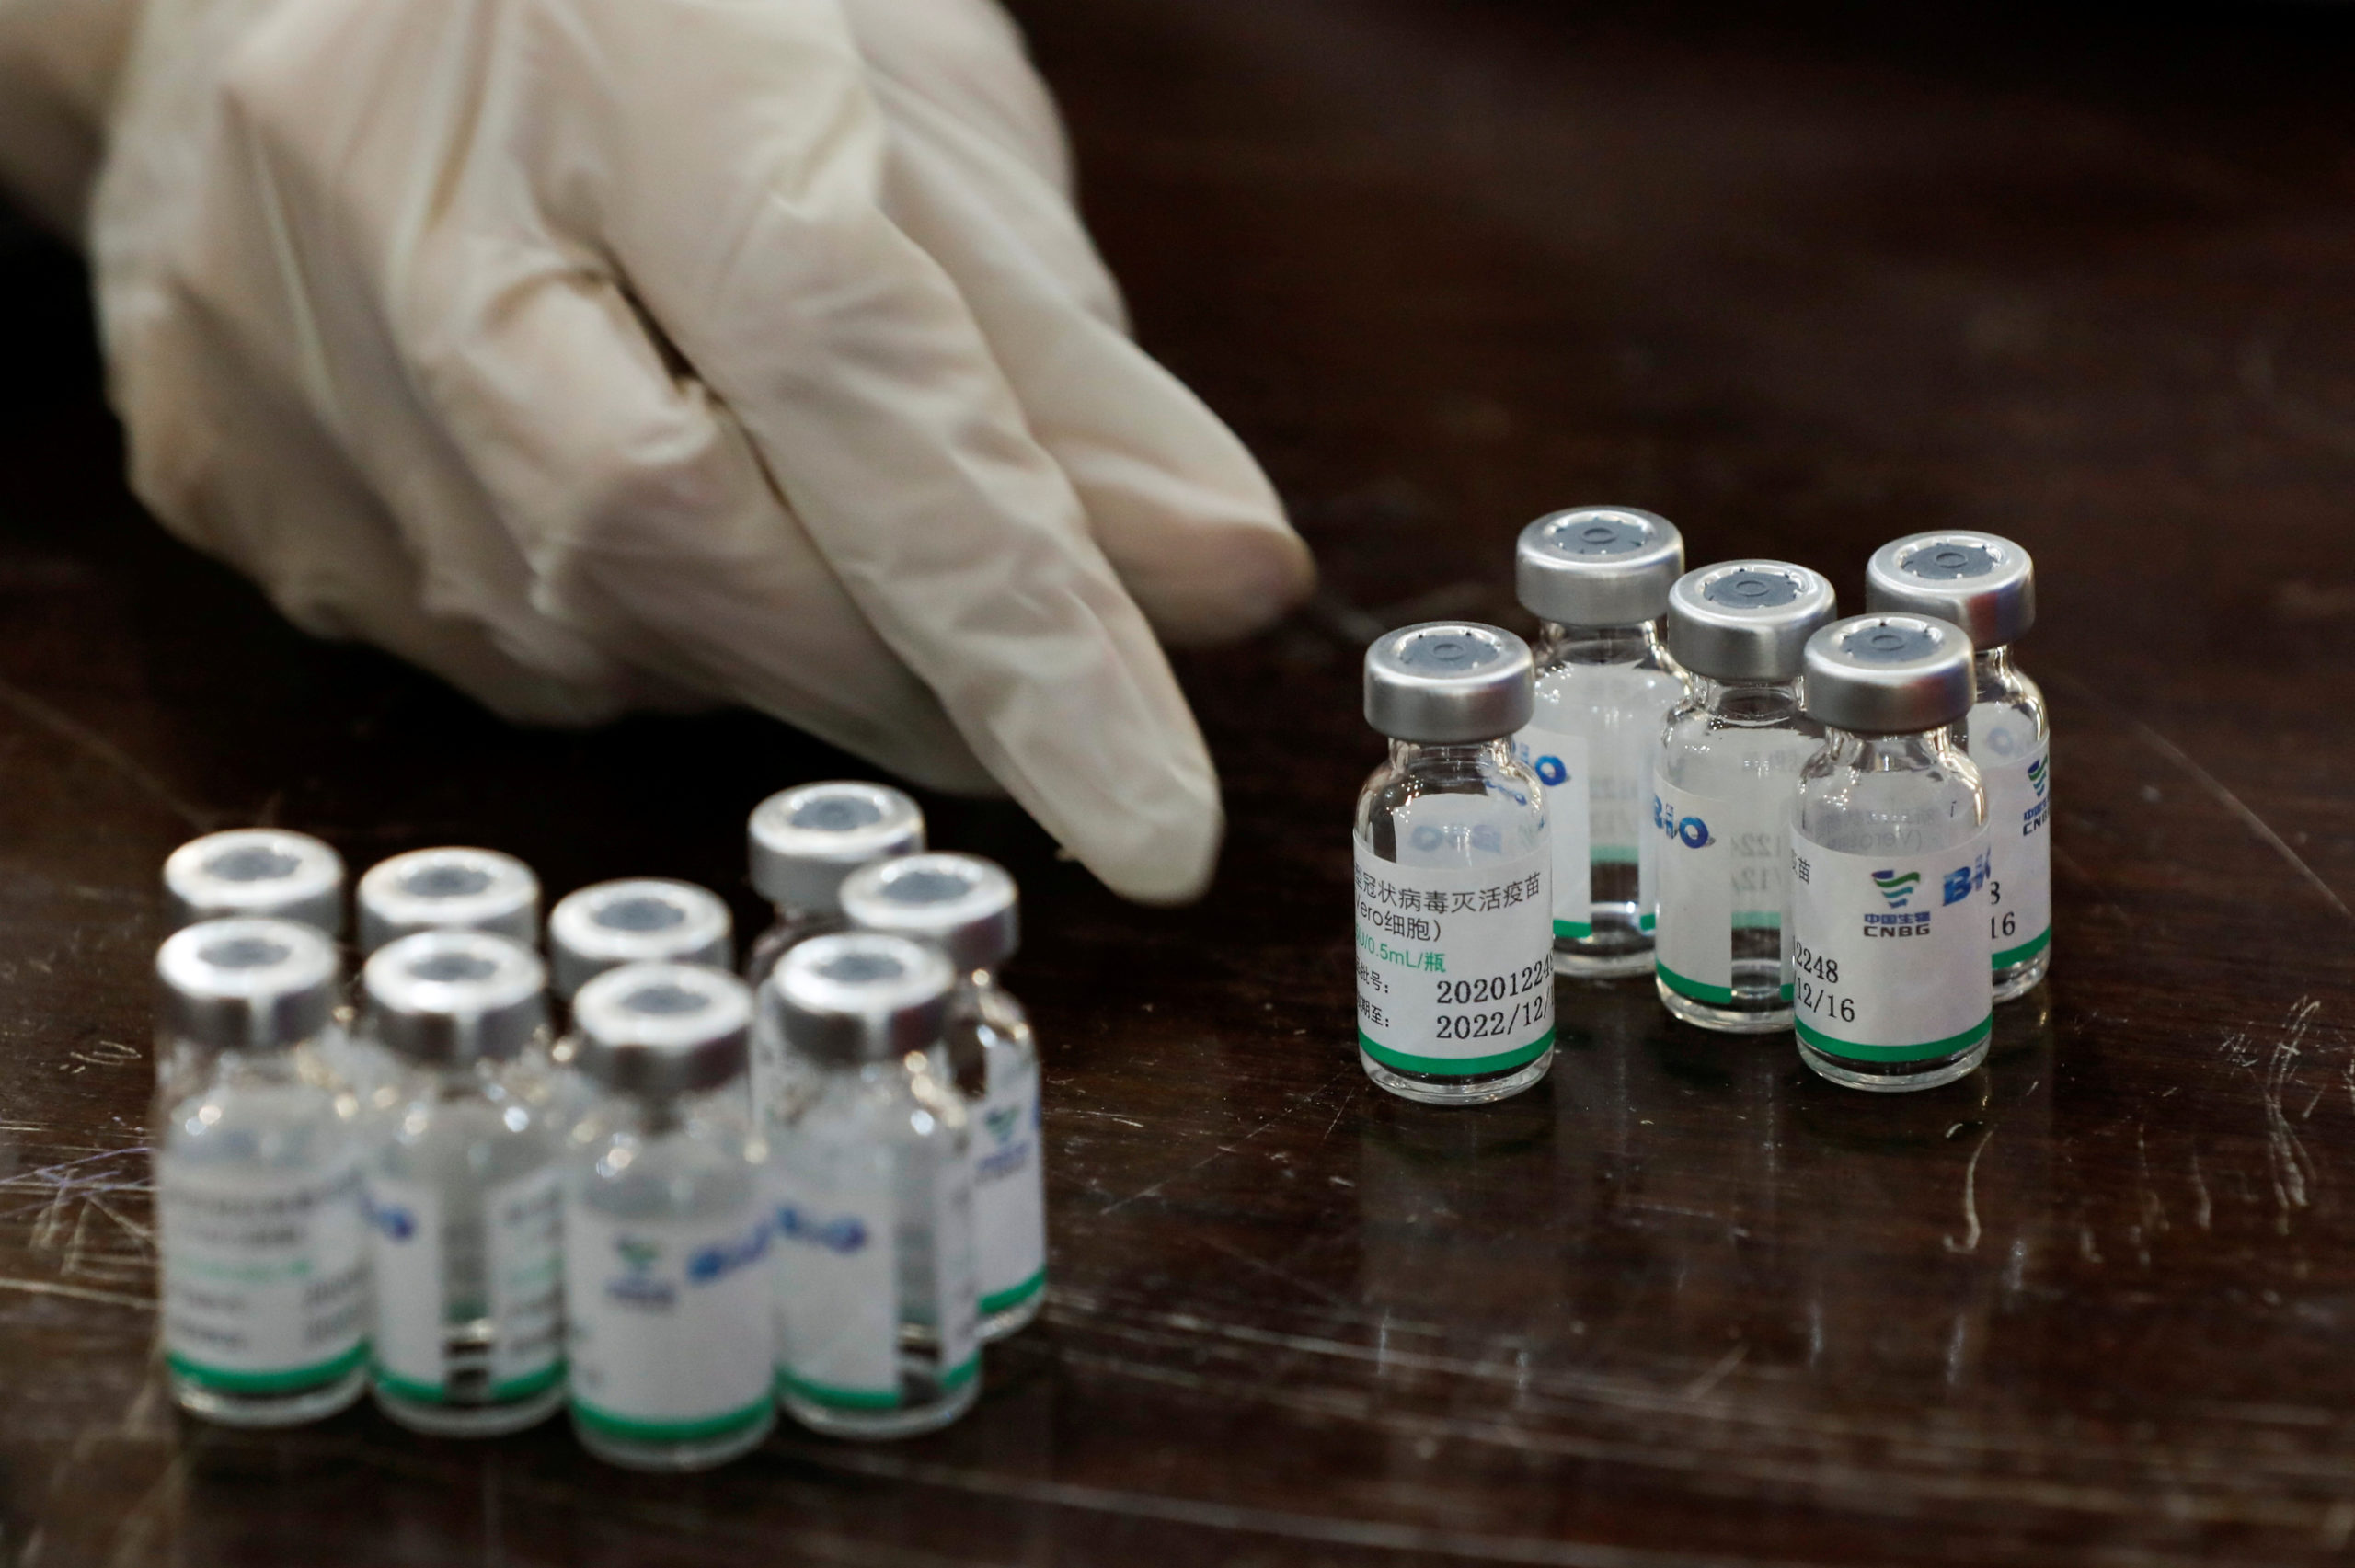 FILE PHOTO: A health worker counts used vials of Sinopharm's coronavirus disease (COVID-19) vaccine, at a vaccination centre in Karachi, Pakistan February 11, 2021. REUTERS/Akhtar Soomro/File Photo